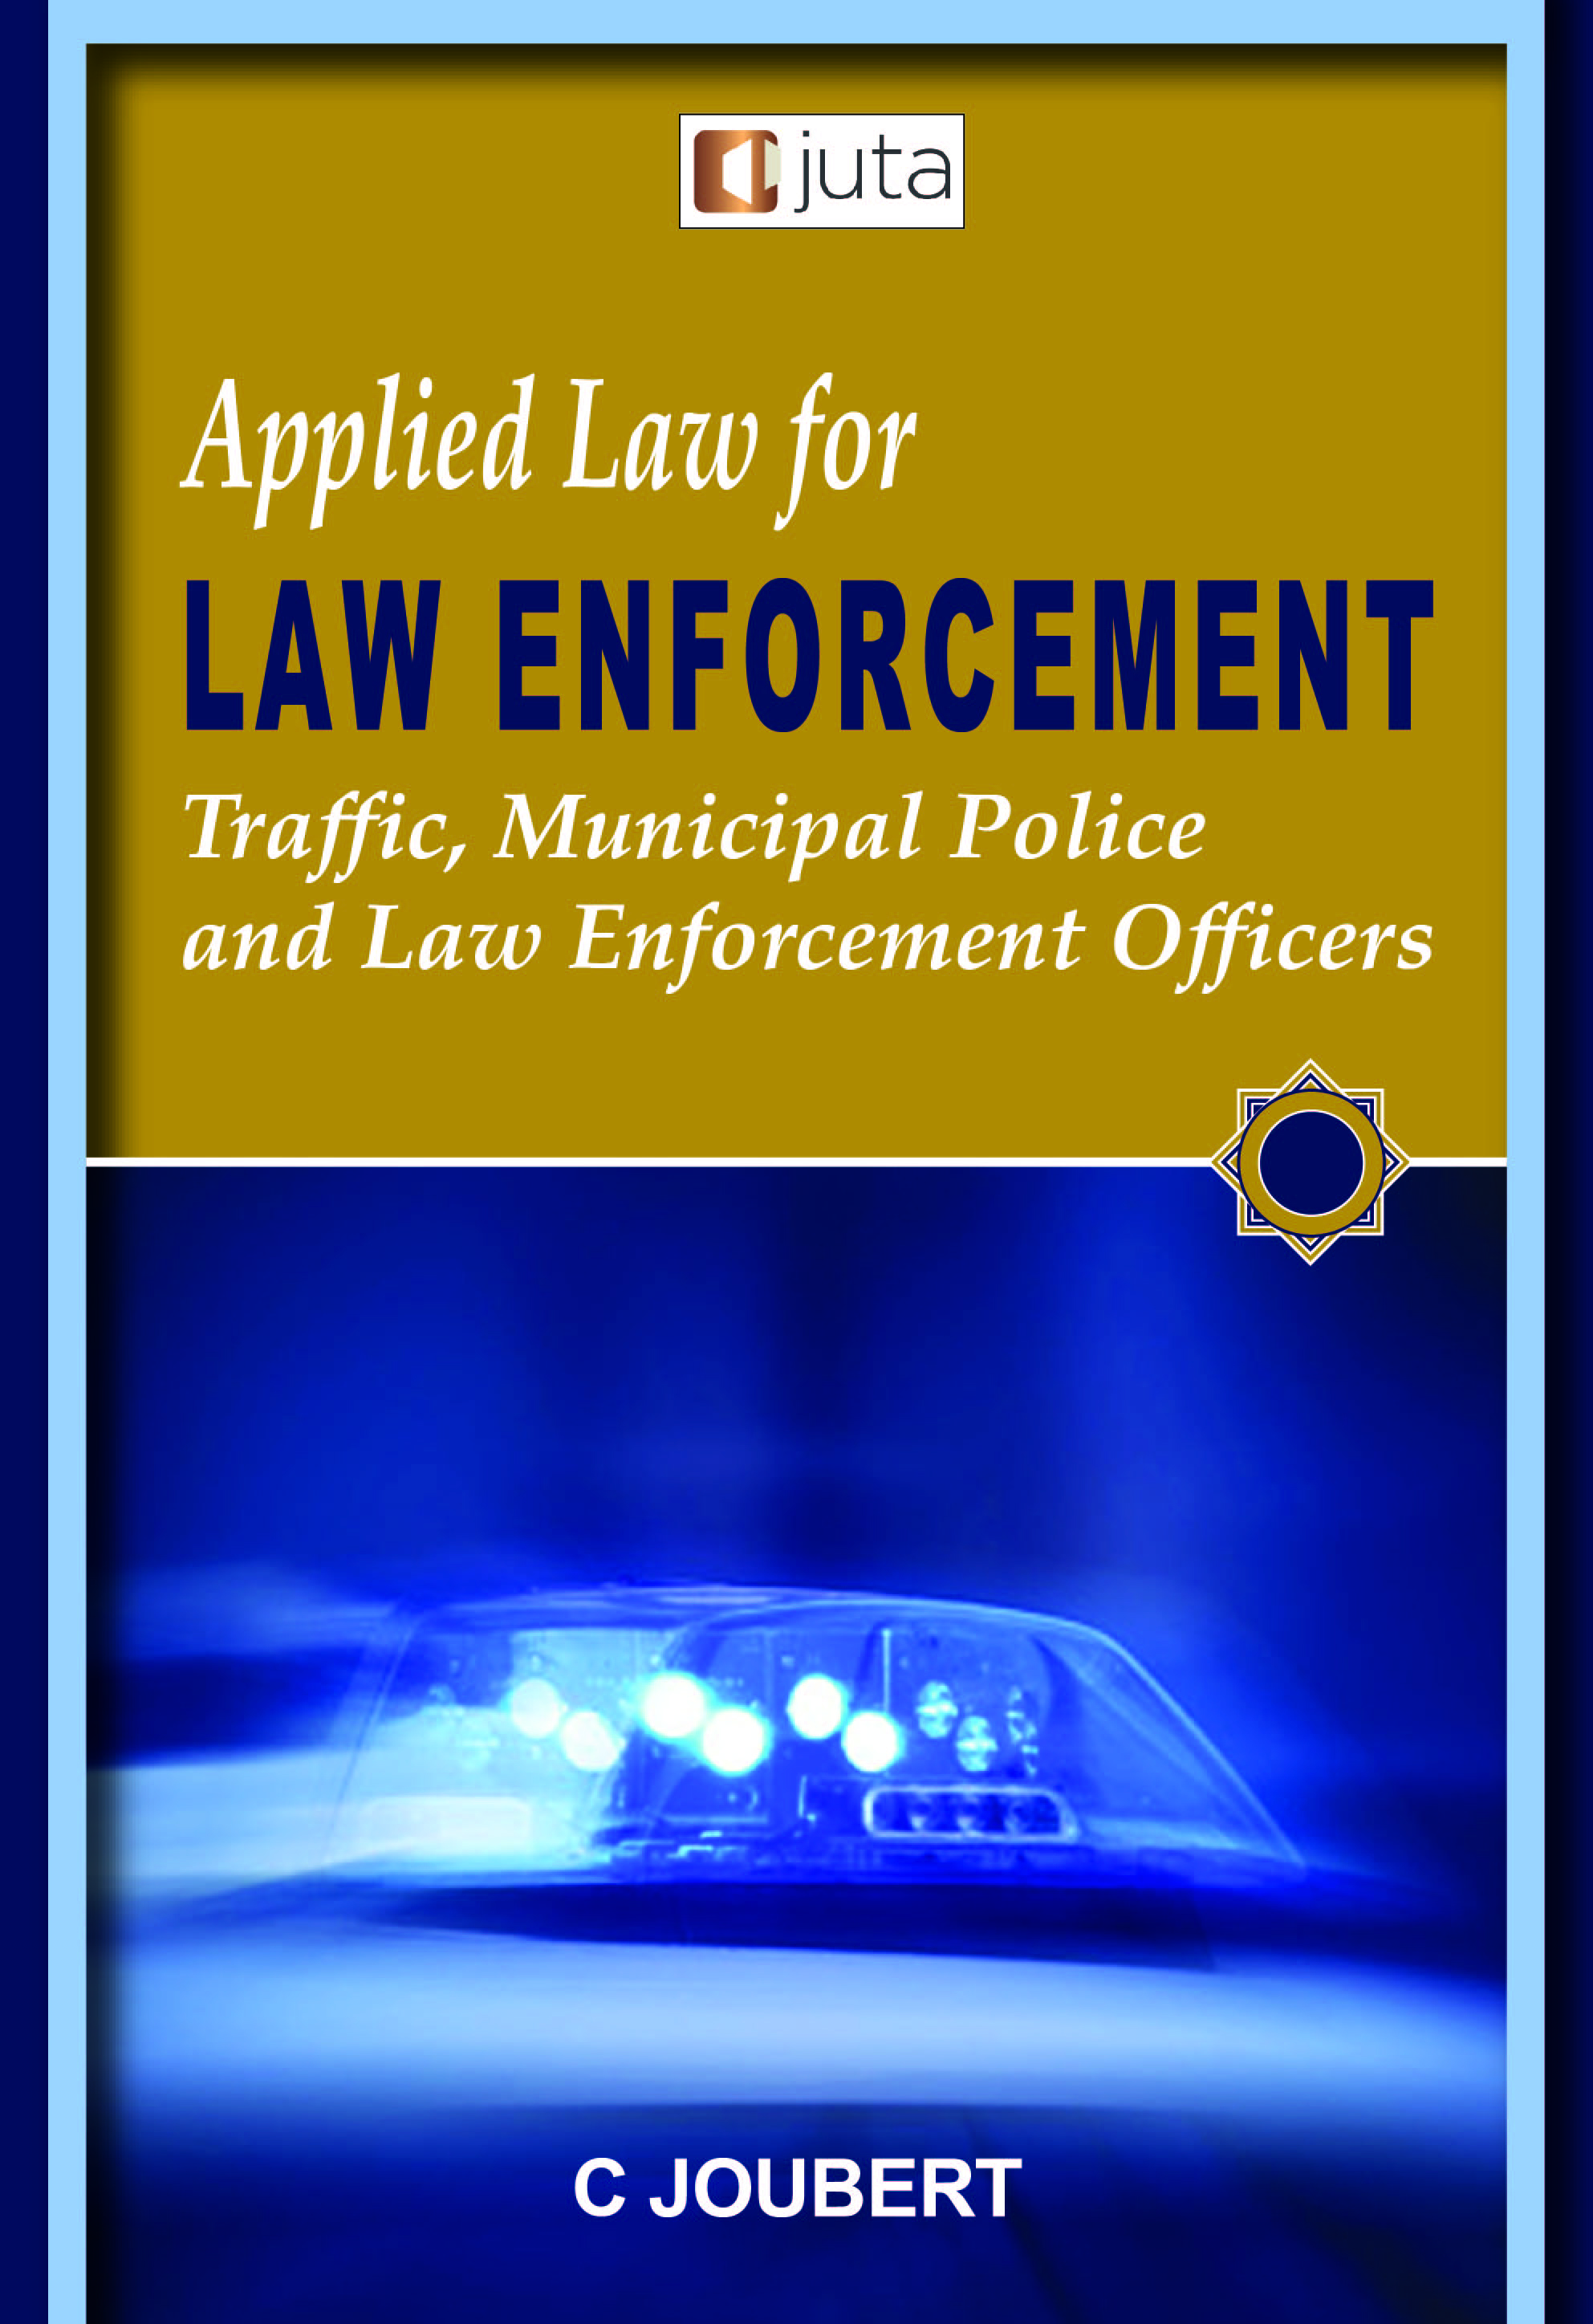 Applied Law for Law Enforcement: Traffic, Municipal Police and Law Enforcement Officers